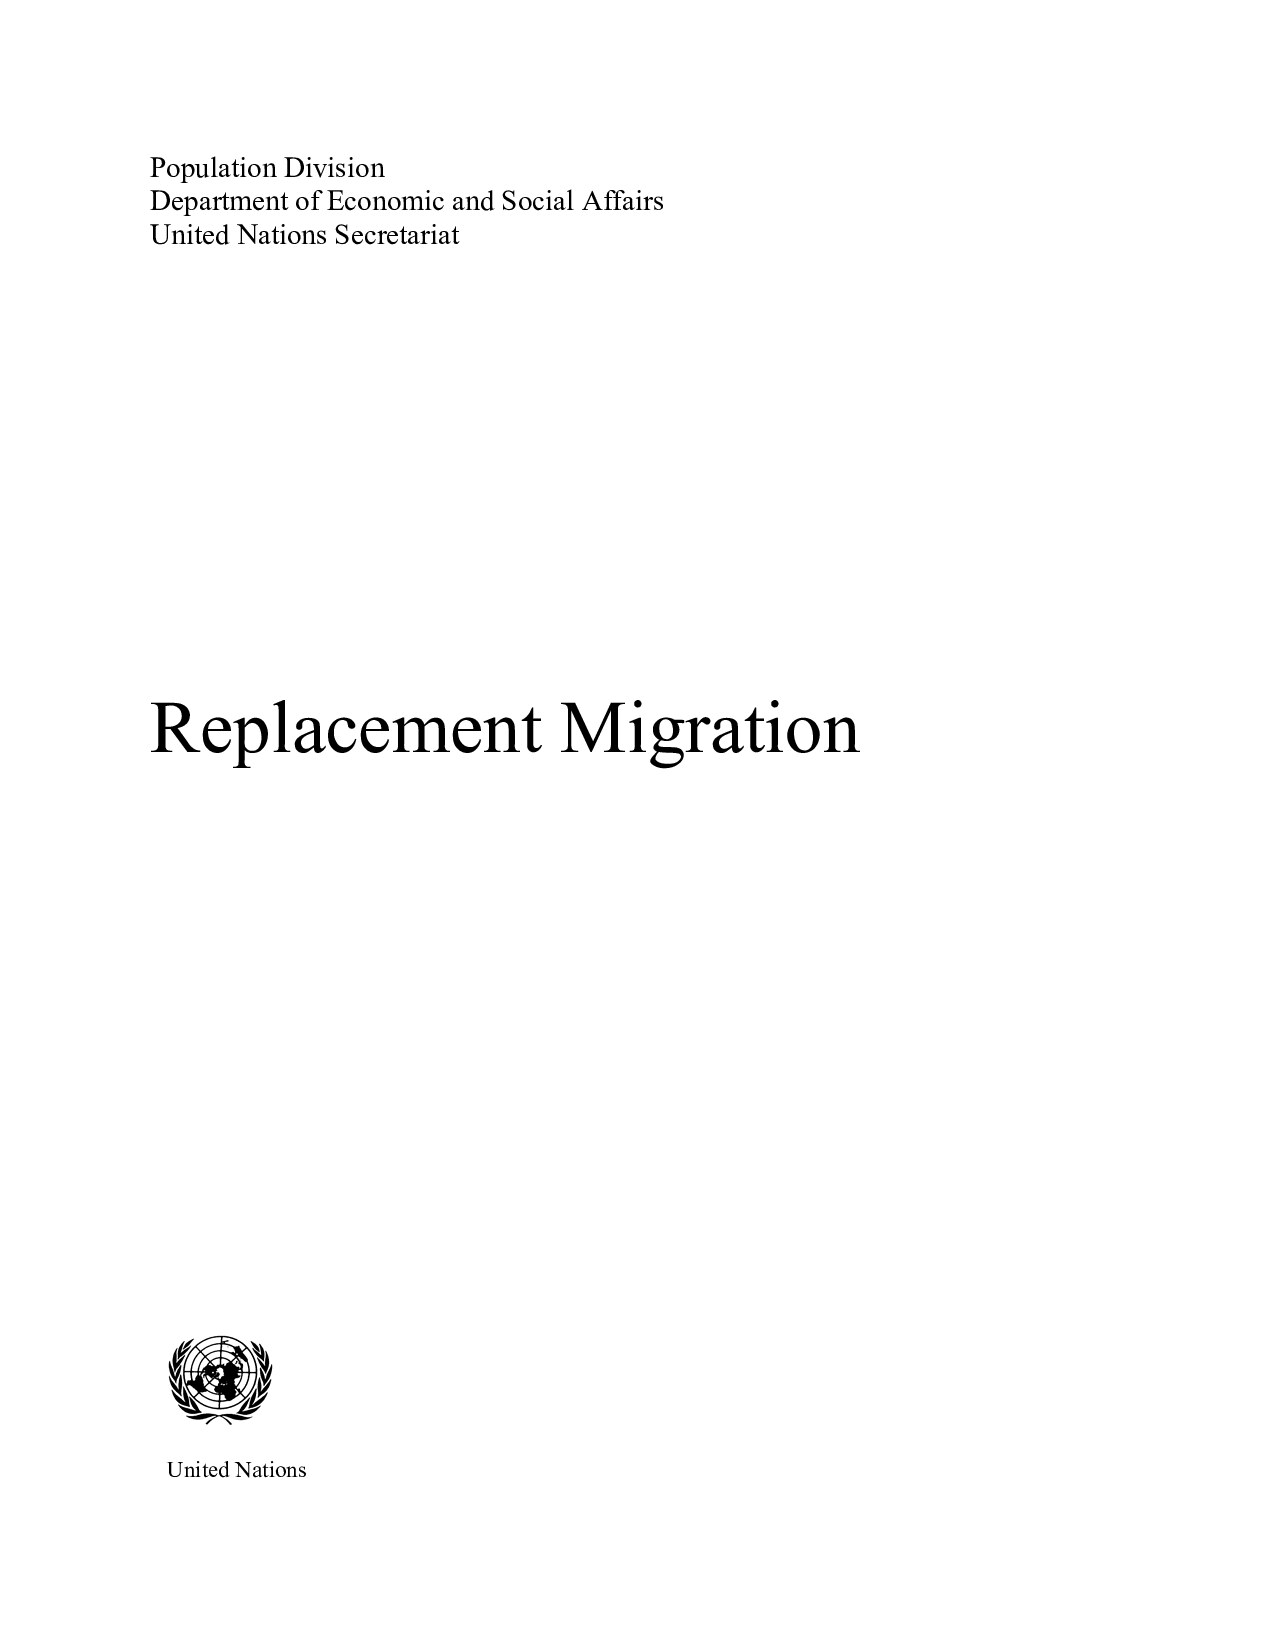 Replacement Migration